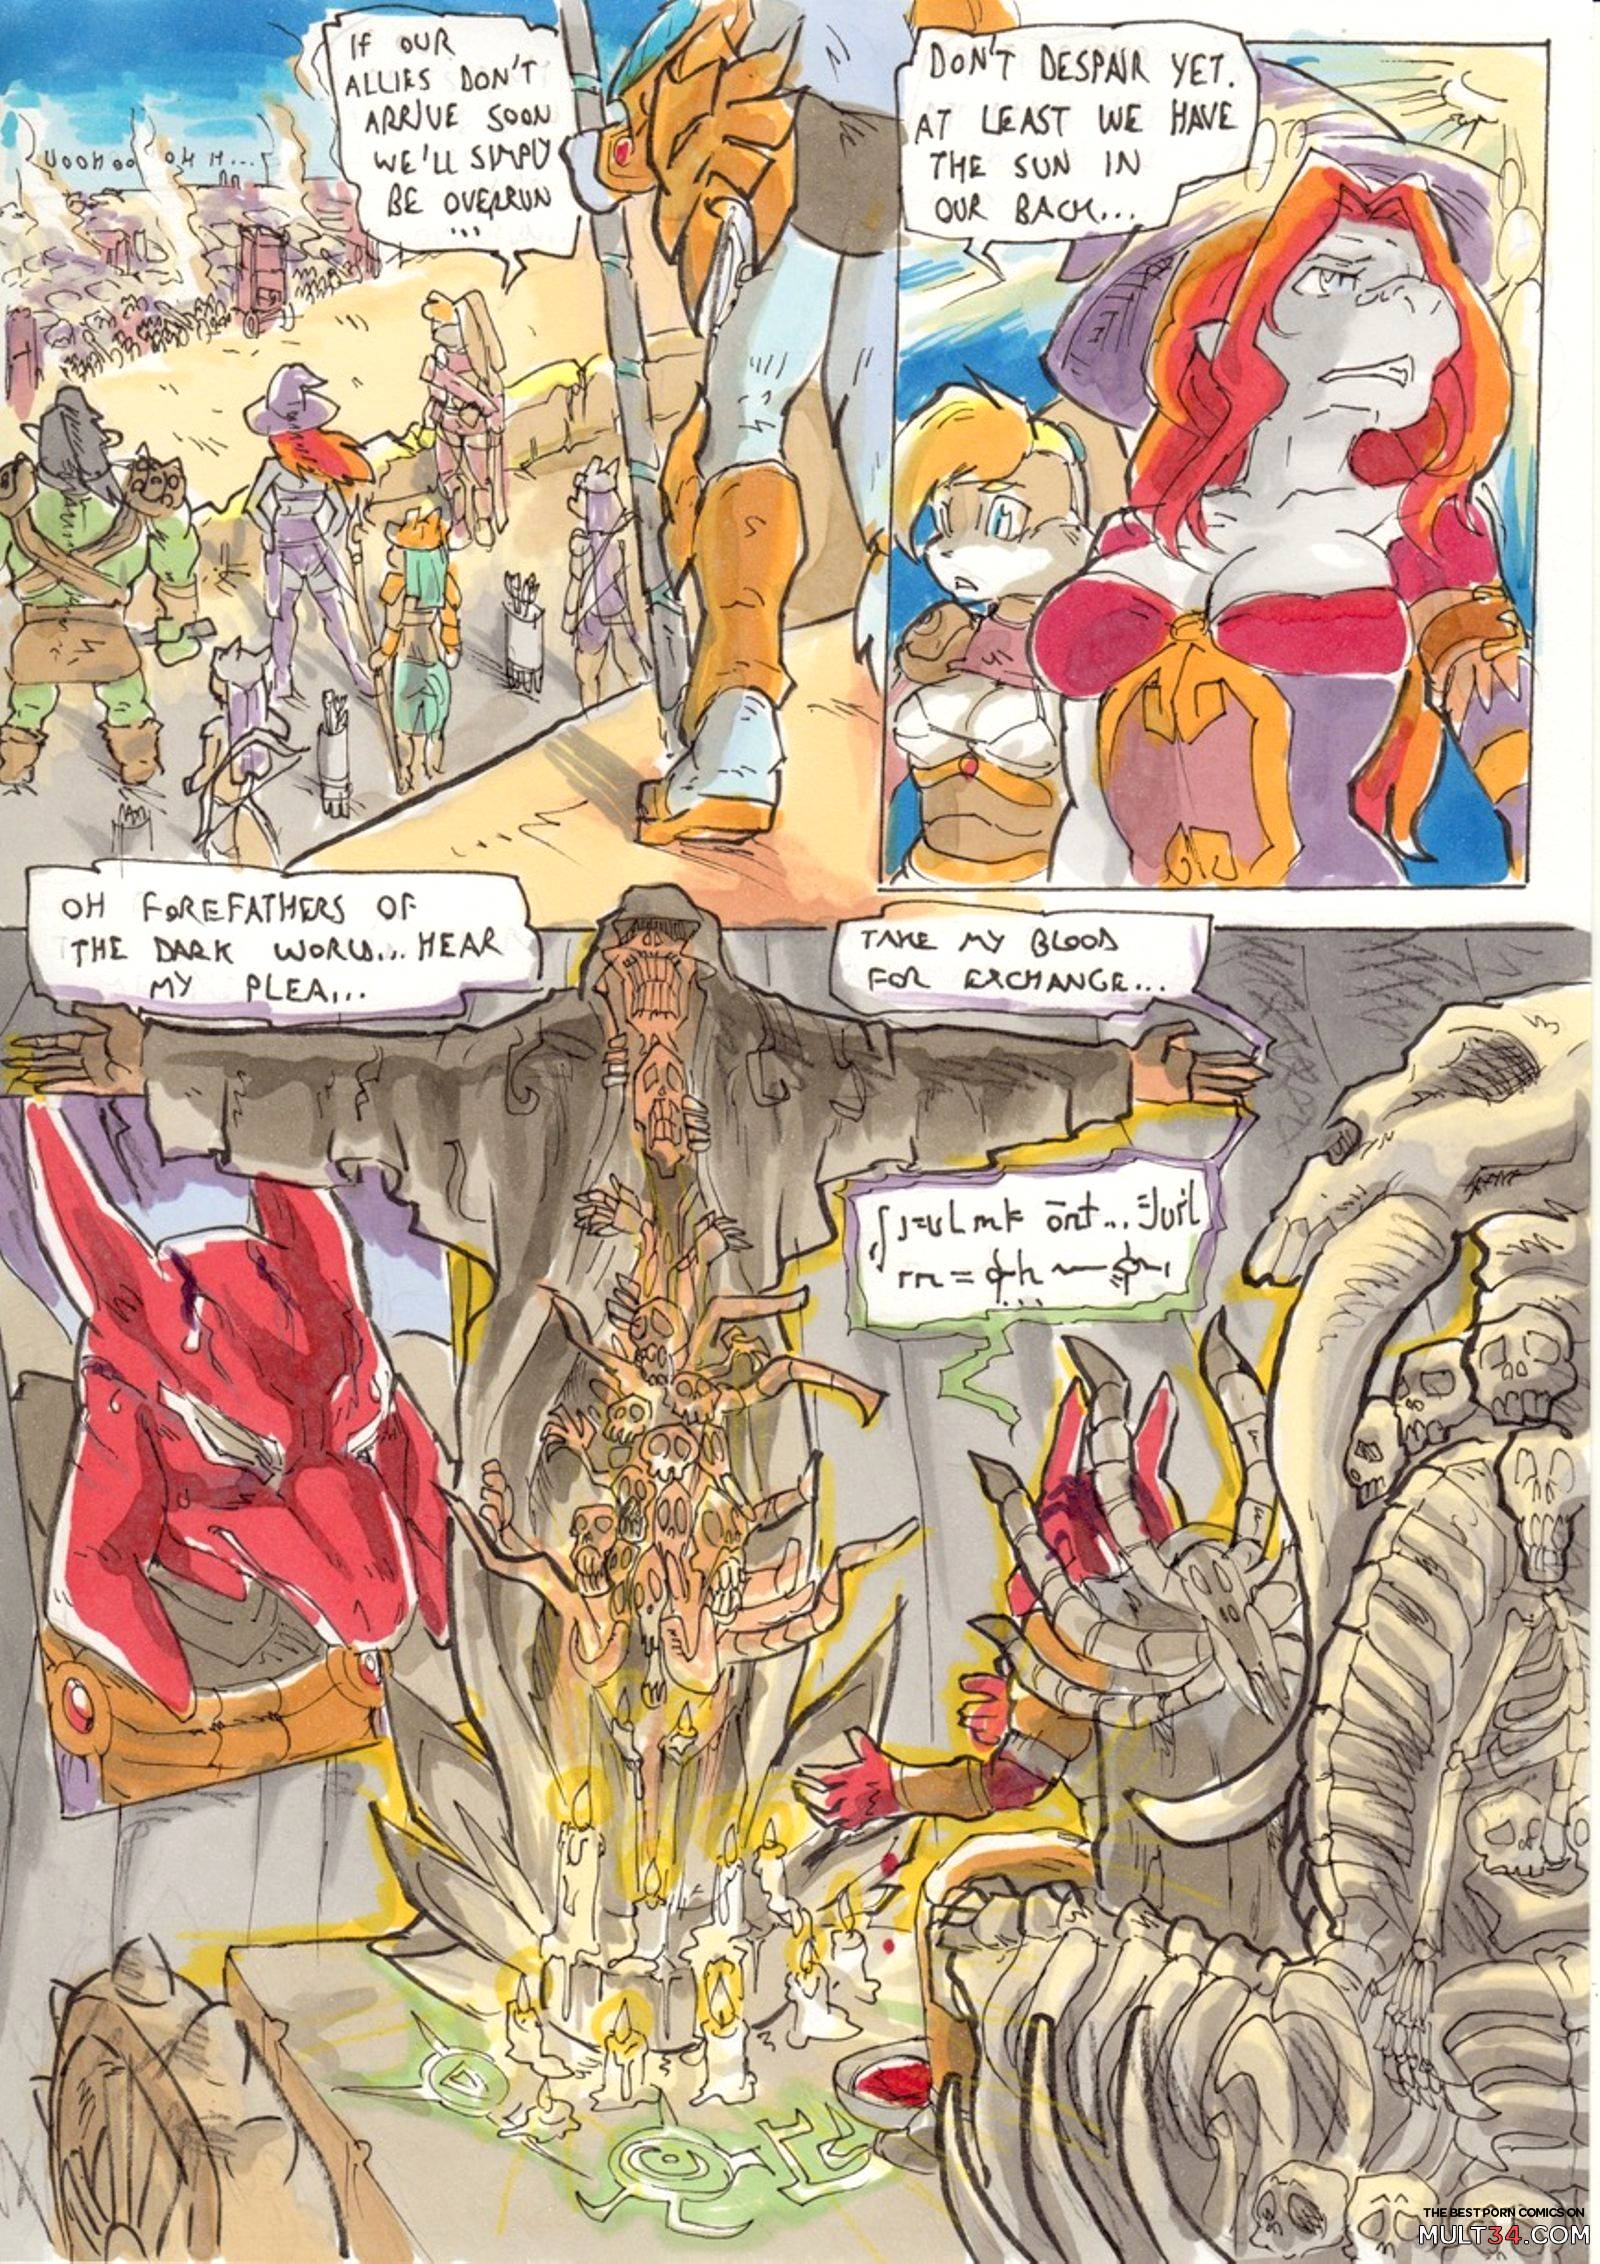 Anubis Stories 5 - The Battle for Anubipolis page 3